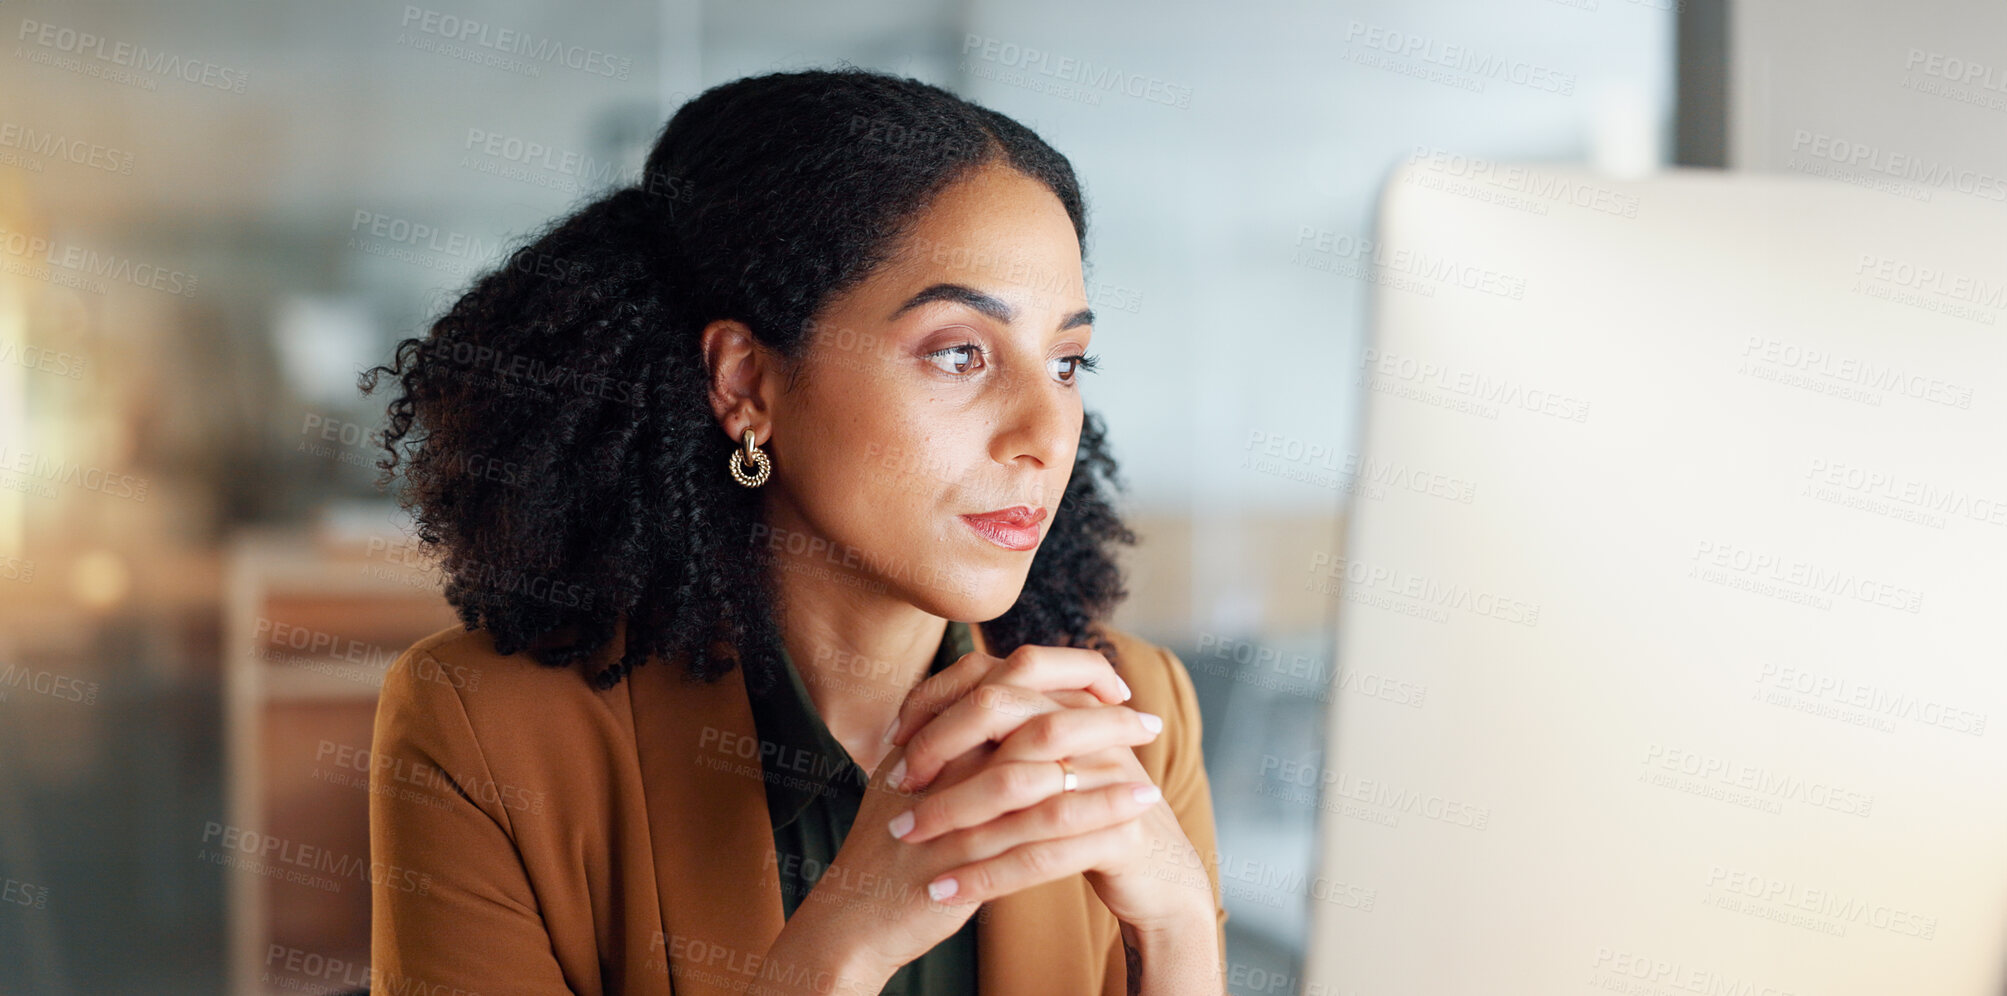 Buy stock photo Businesswoman at computer with stress, thinking and reading email, debt review or article on taxes at digital agency. Internet, research and woman at tech startup, anxiety and risk in audit report.